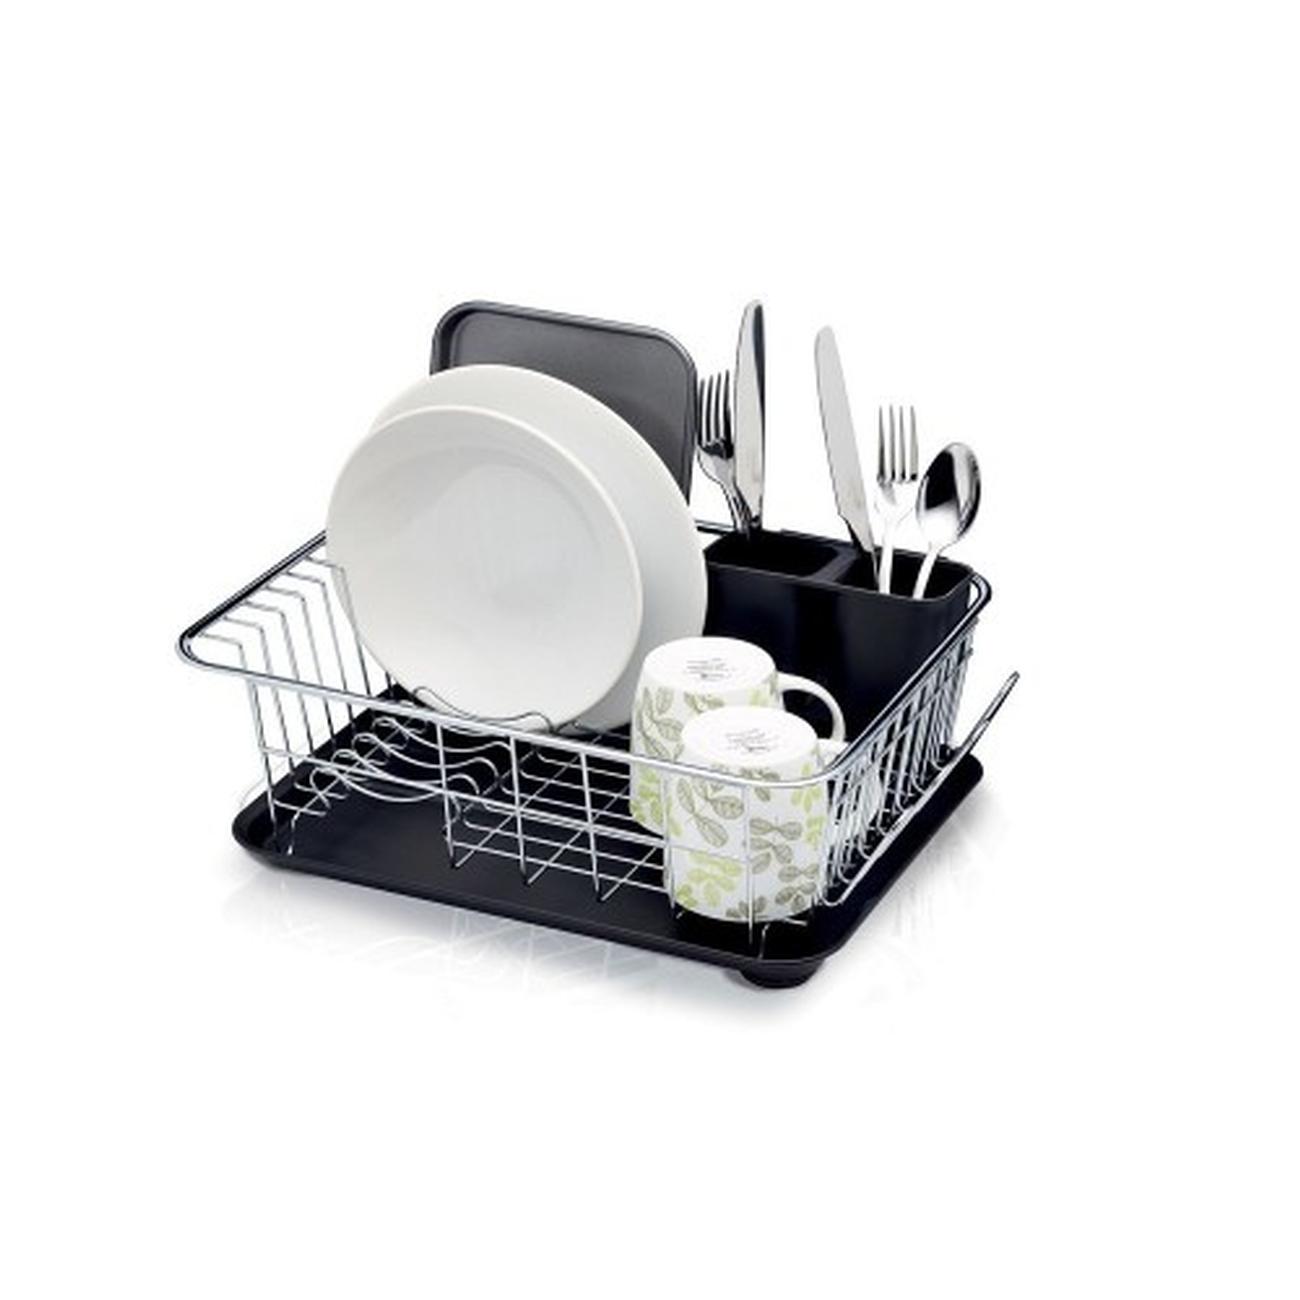 kc-chrome-plated-dish-drainer - KitchenCraft Chrome Plated Dish Drainer